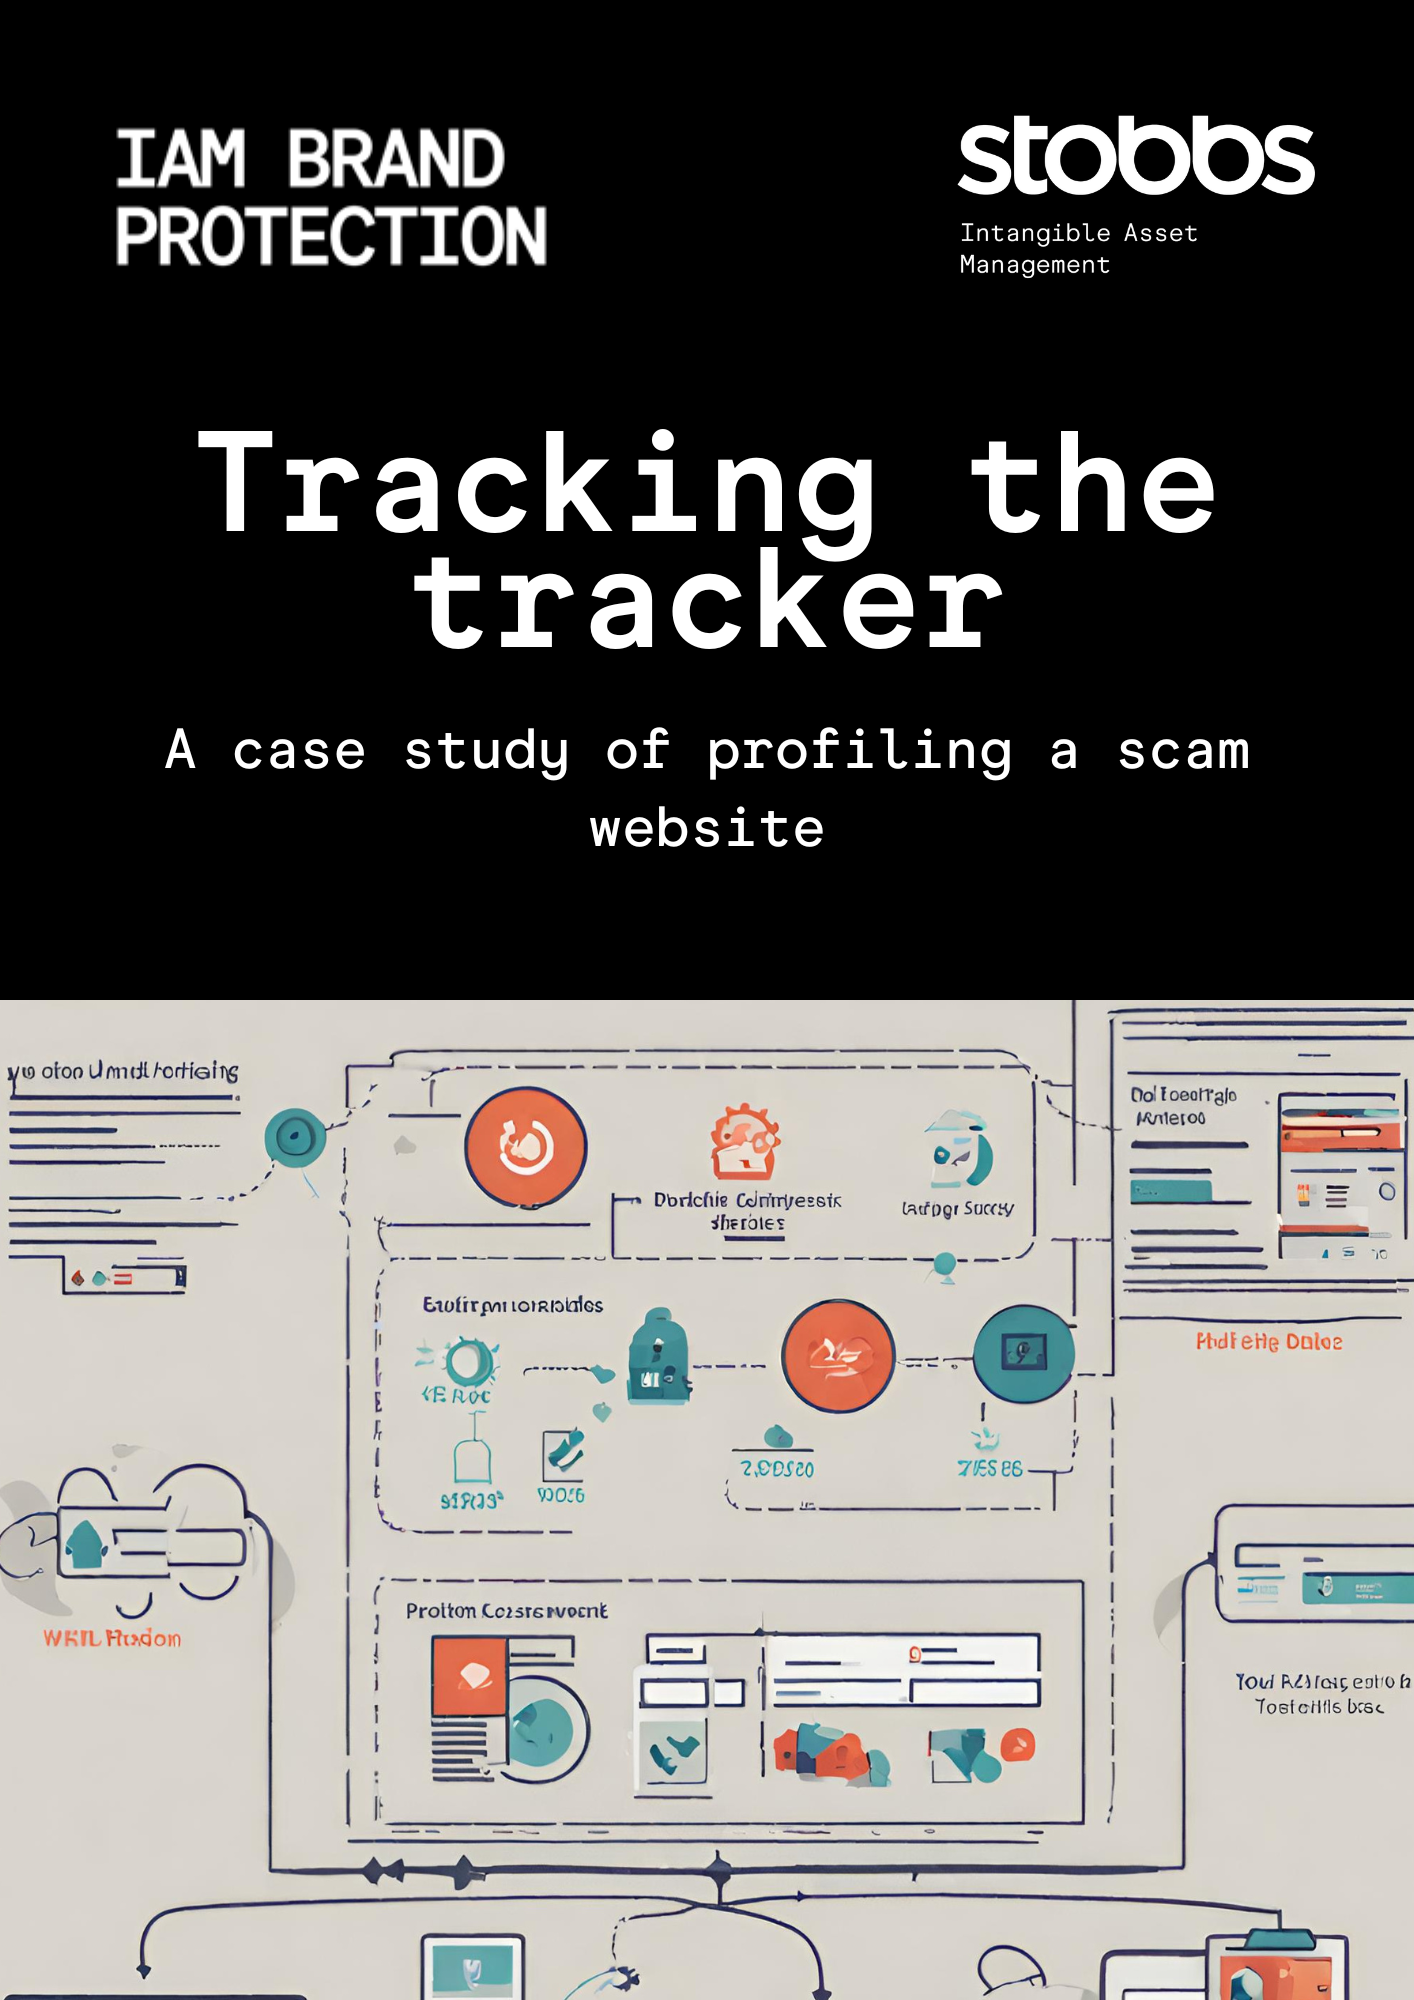 9. Tracking scam case study